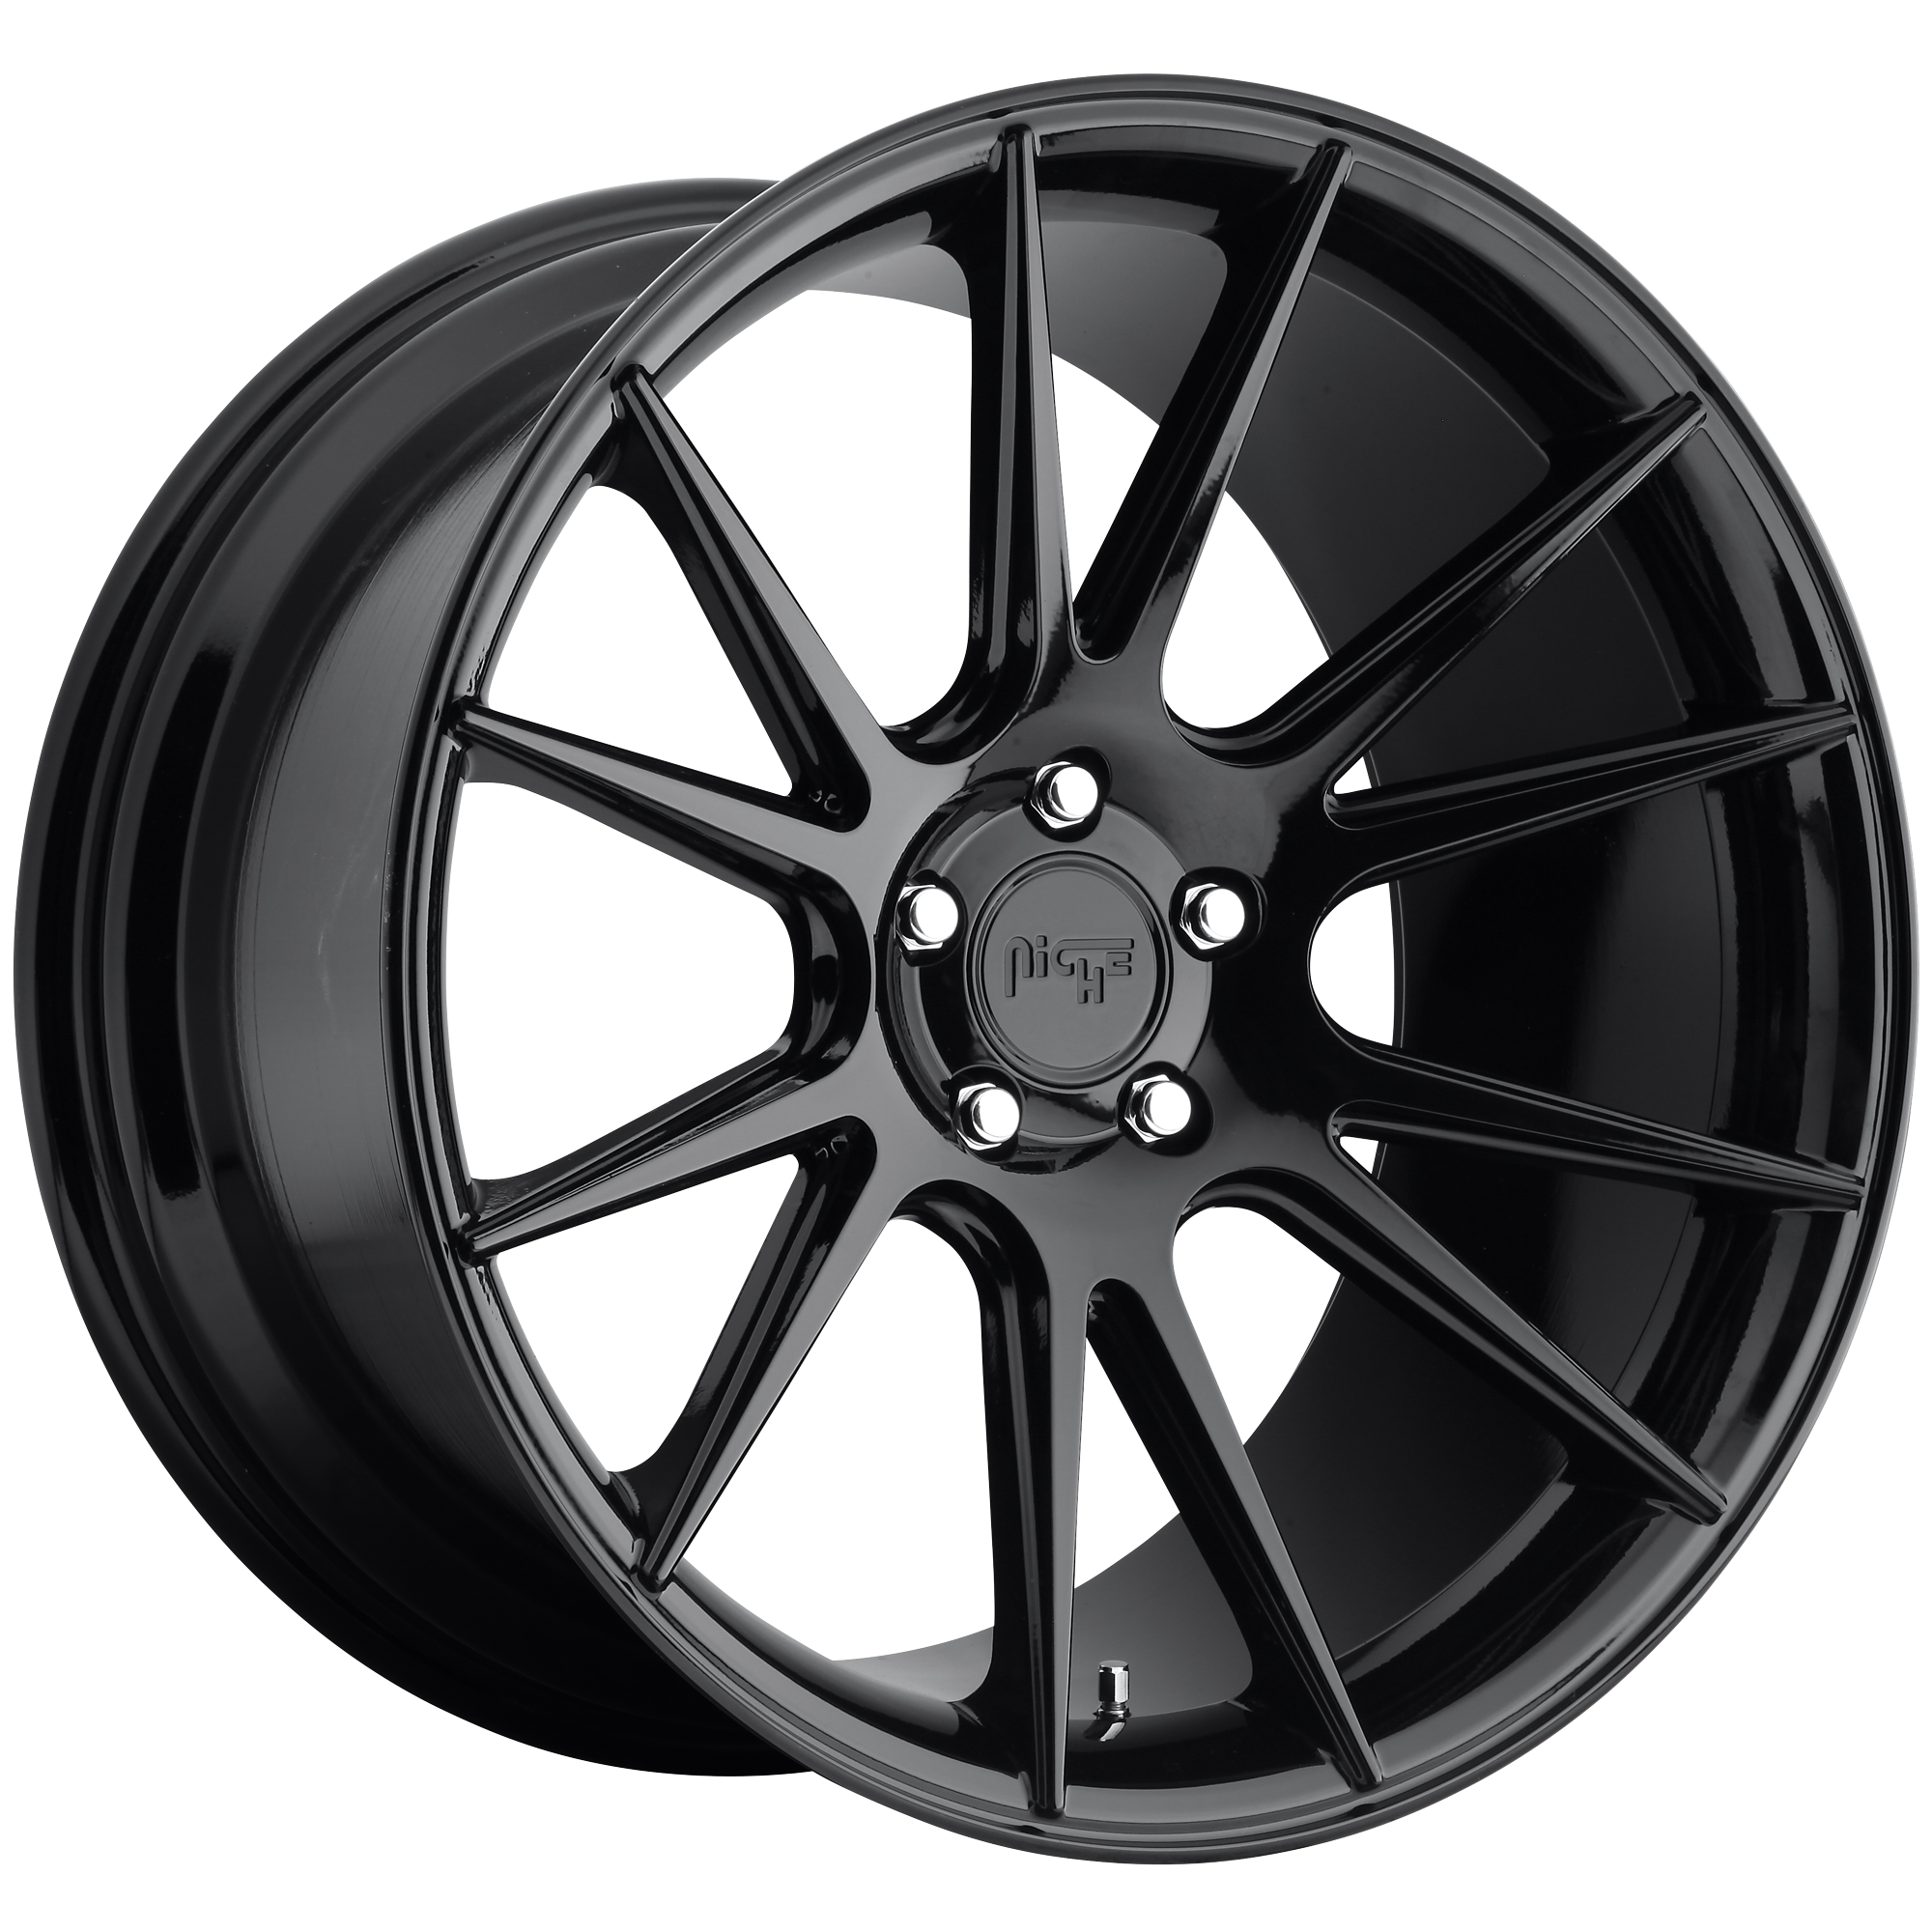 VICENZA 20x9 5x120.00 GLOSS BLACK (35 mm) - Tires and Engine Performance